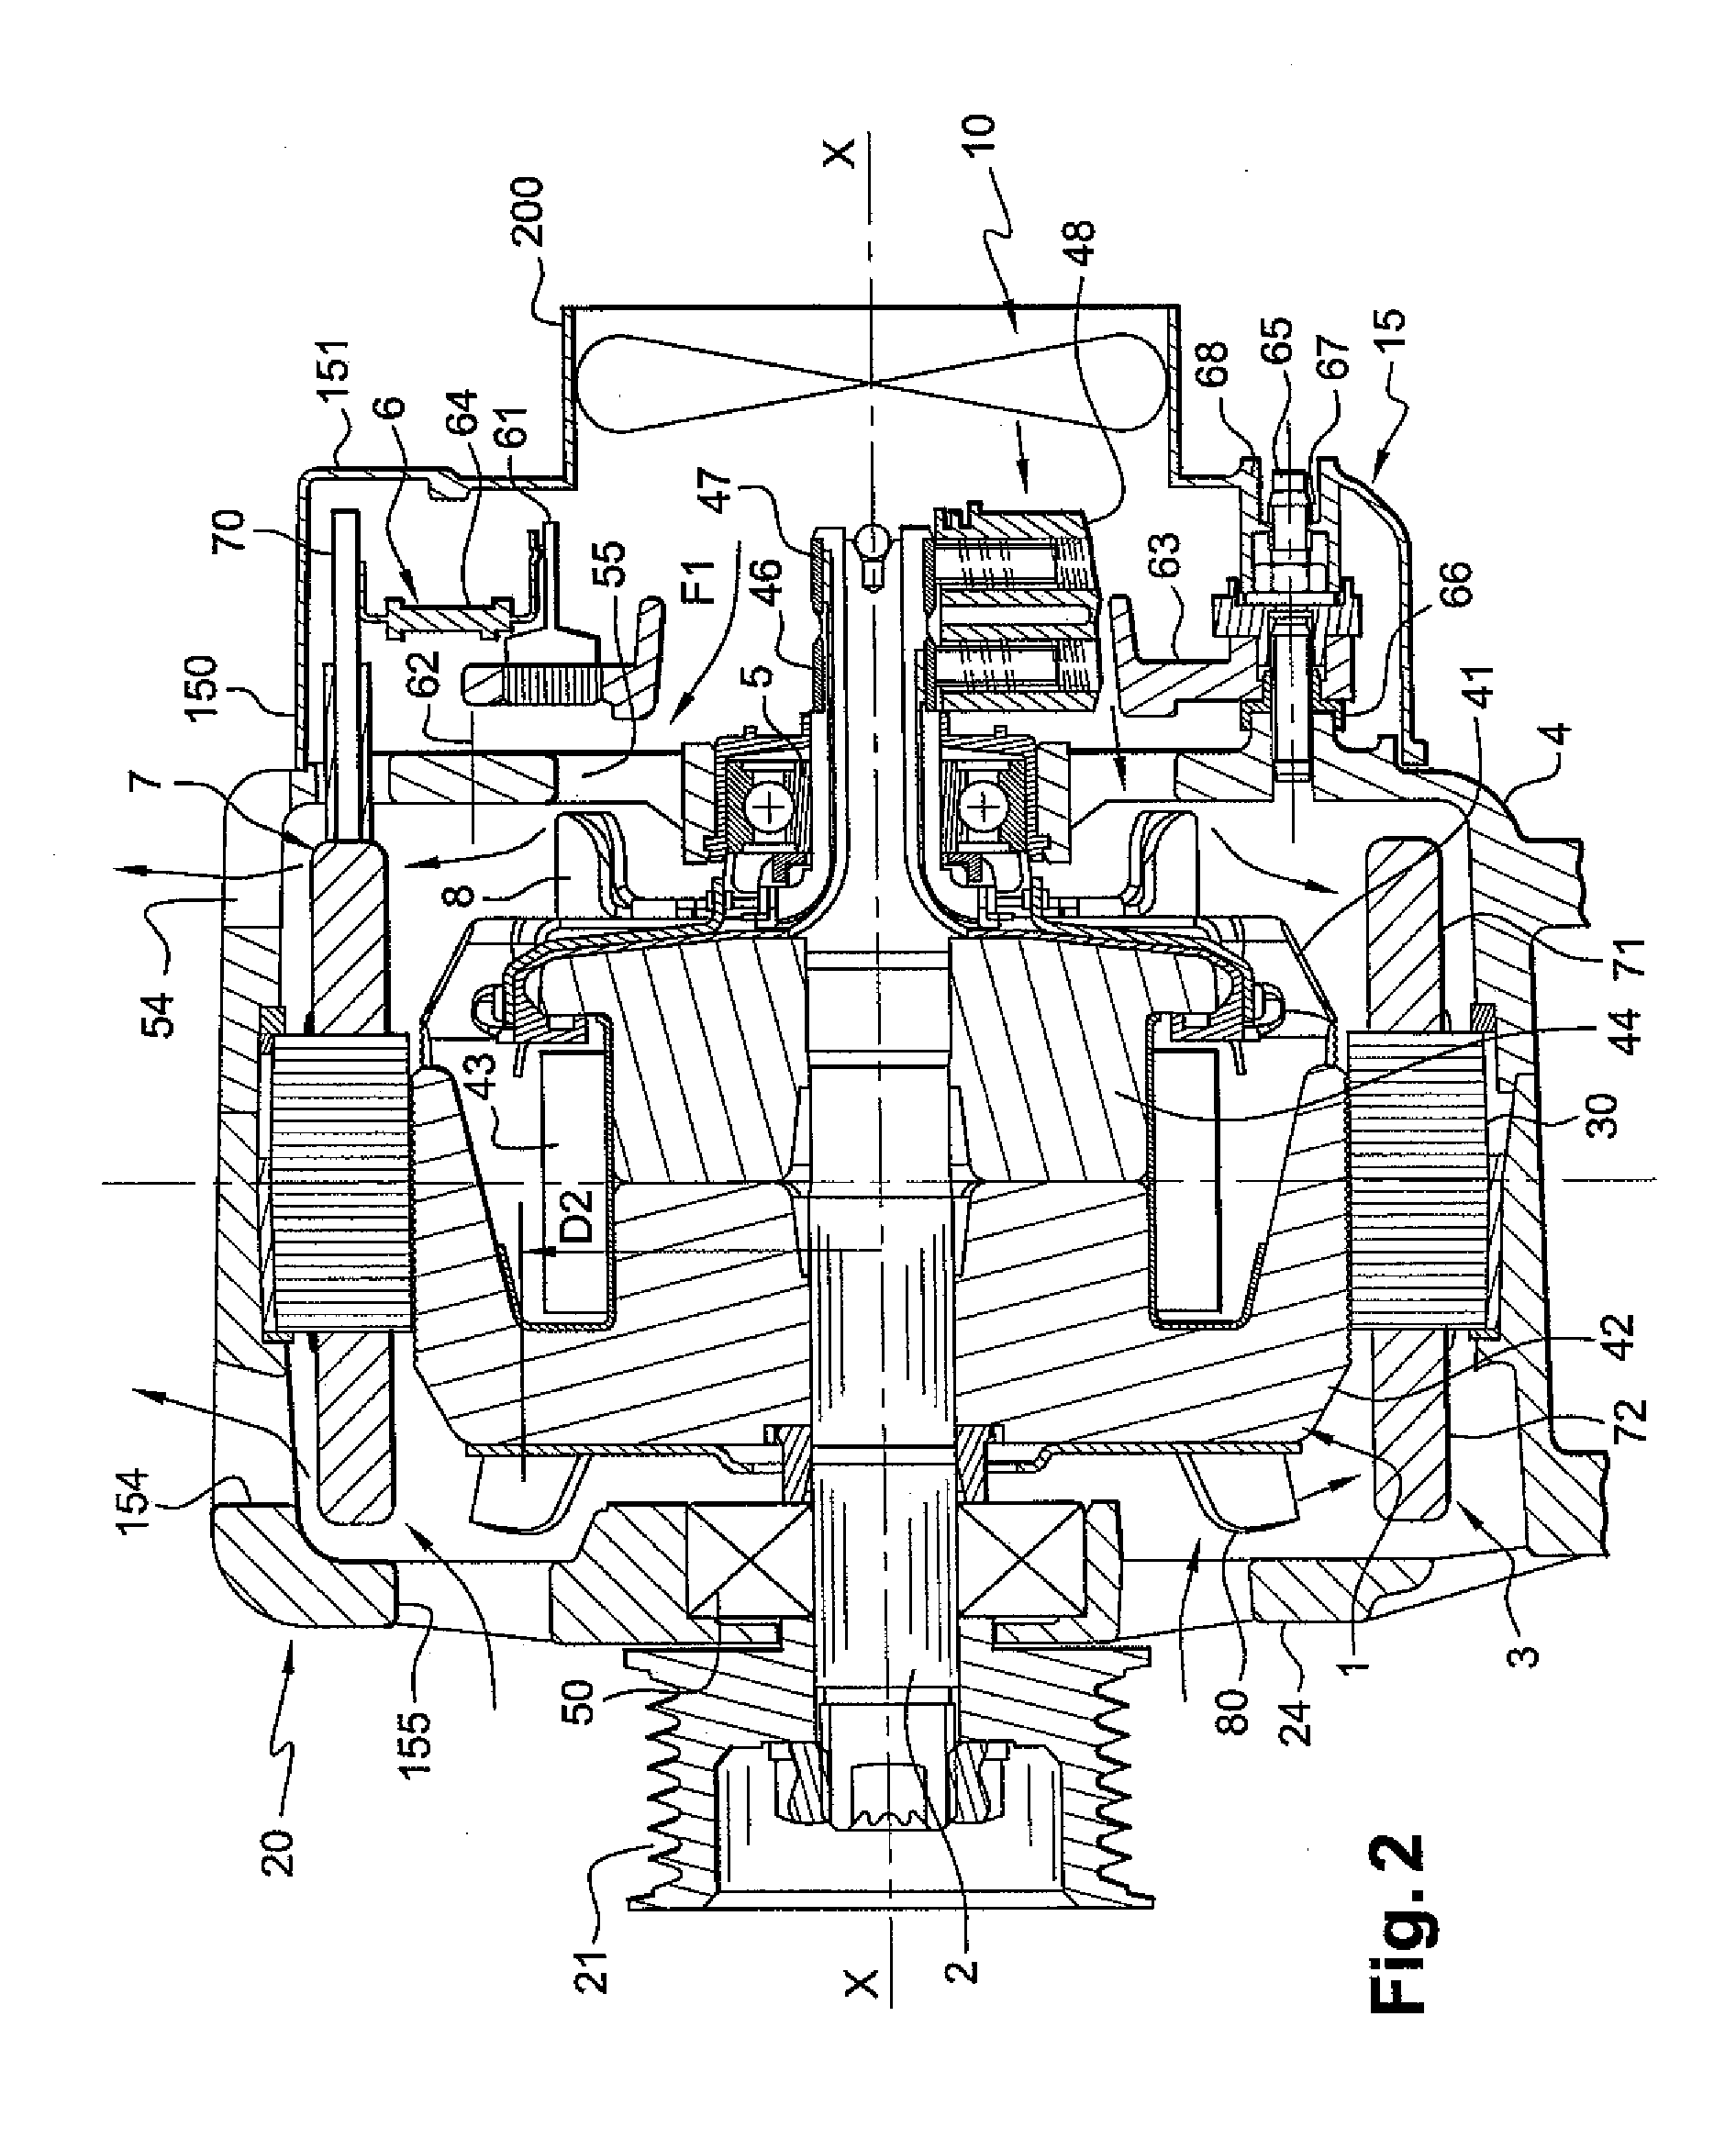 Ventilating system for electrical rotating electrical machines equipped with a forced-fluid flow cooling device and rotating electrical machine comprising same